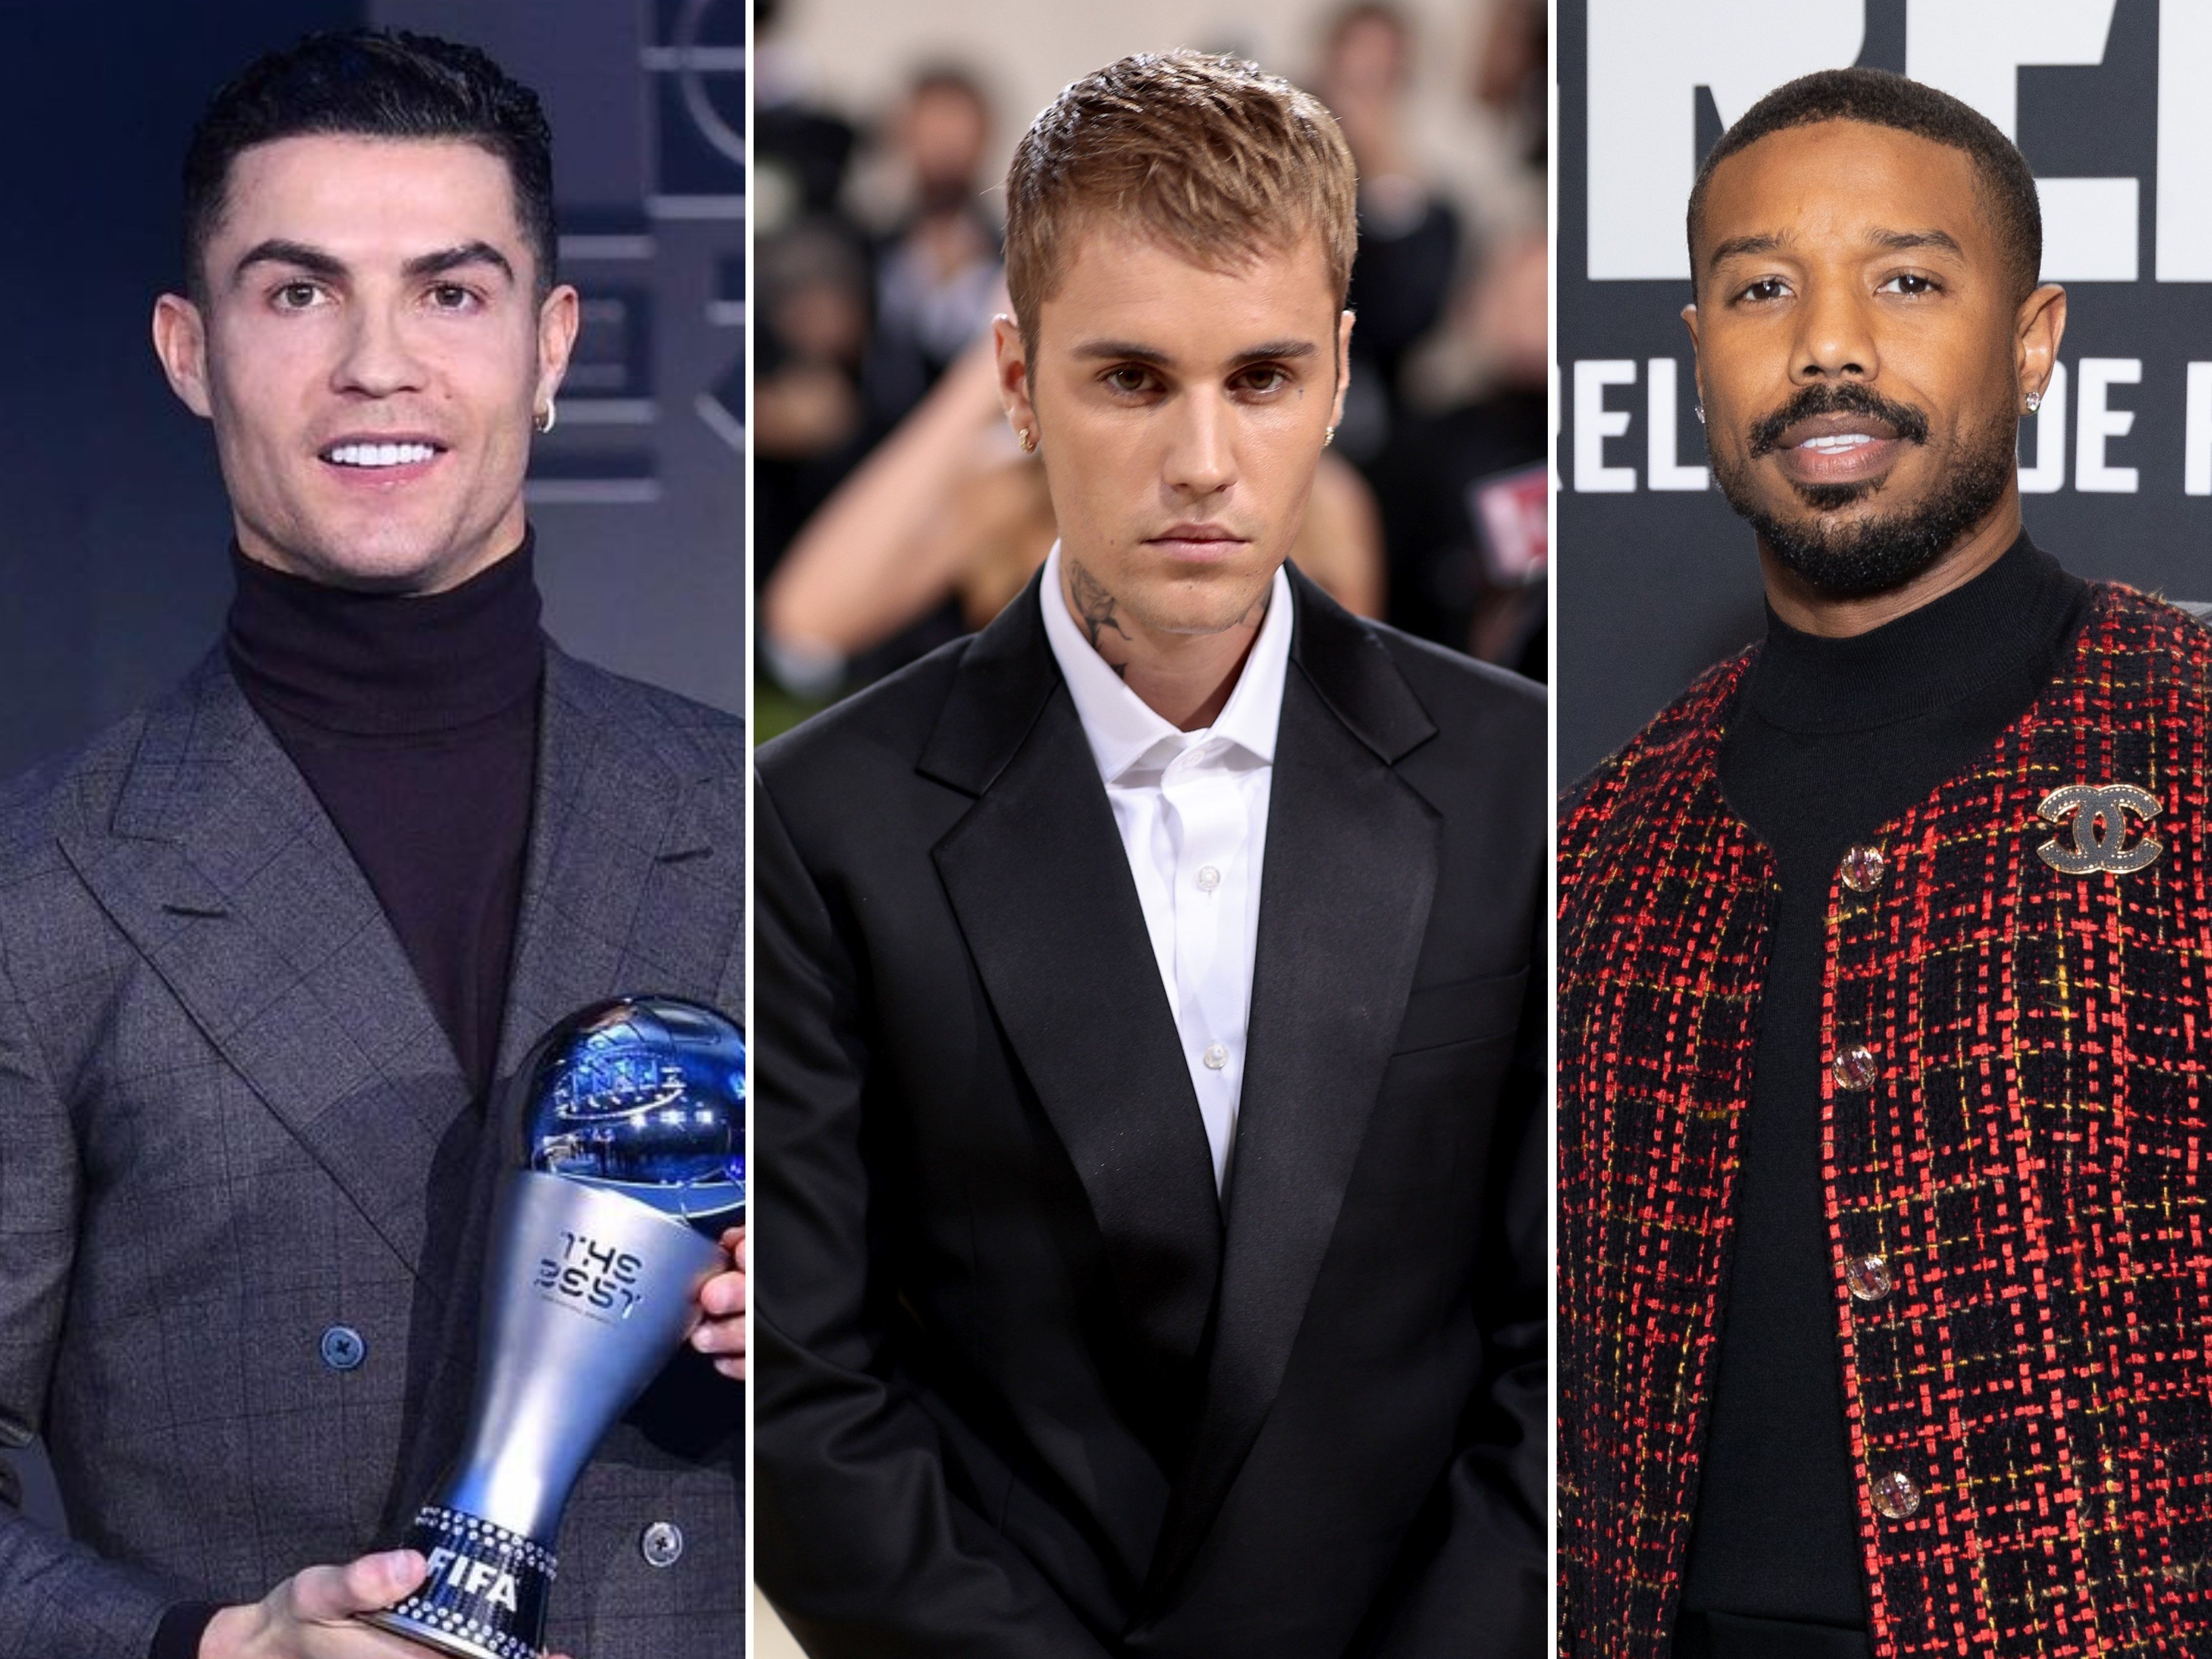 Celebrities who escaped unhurt in car crashes include Cristiano Ronaldo, Justin Bieber and Michael B. Jordan. Photos: Getty Images, @cristiano/Instagram